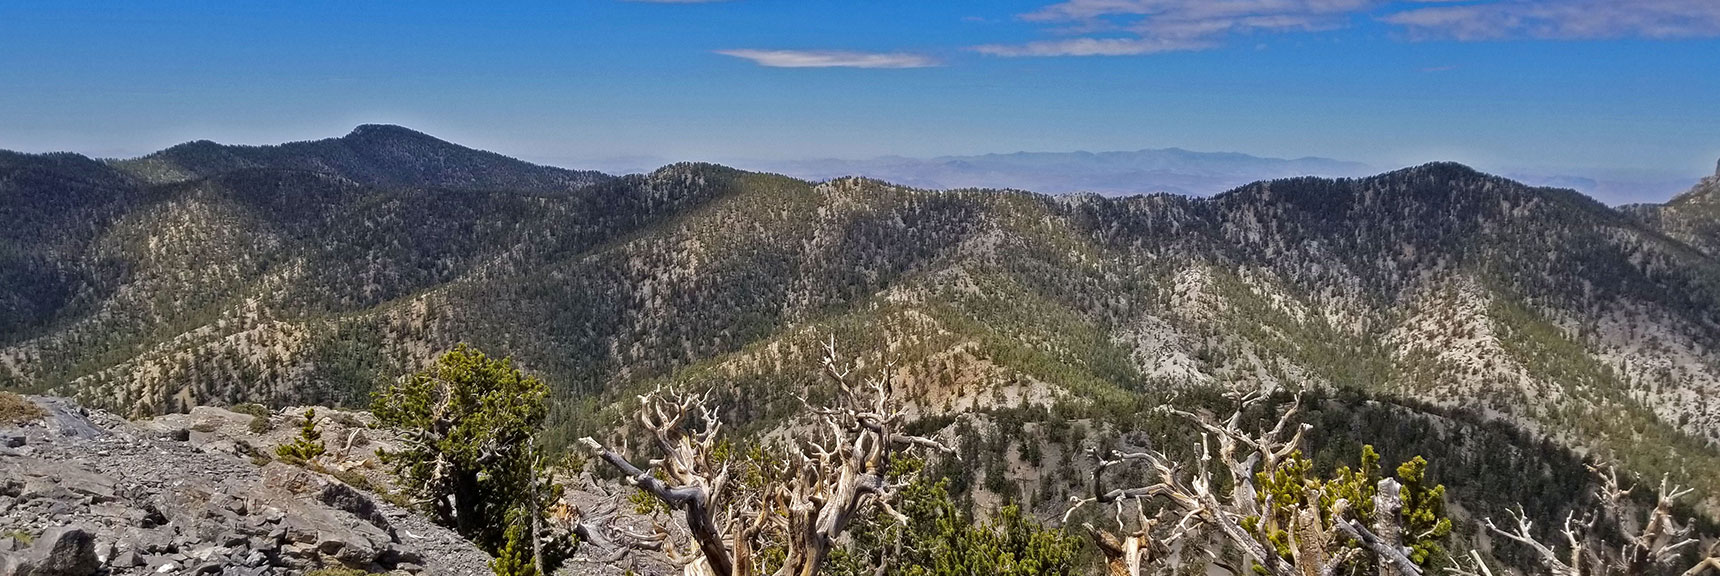 Bonanza Trail Ridgeline. Don't Yet Know the Distant Mountains. Nopah Range? | The Sisters South | Lee Canyon | Mt Charleston Wilderness | Spring Mountains, Nevada